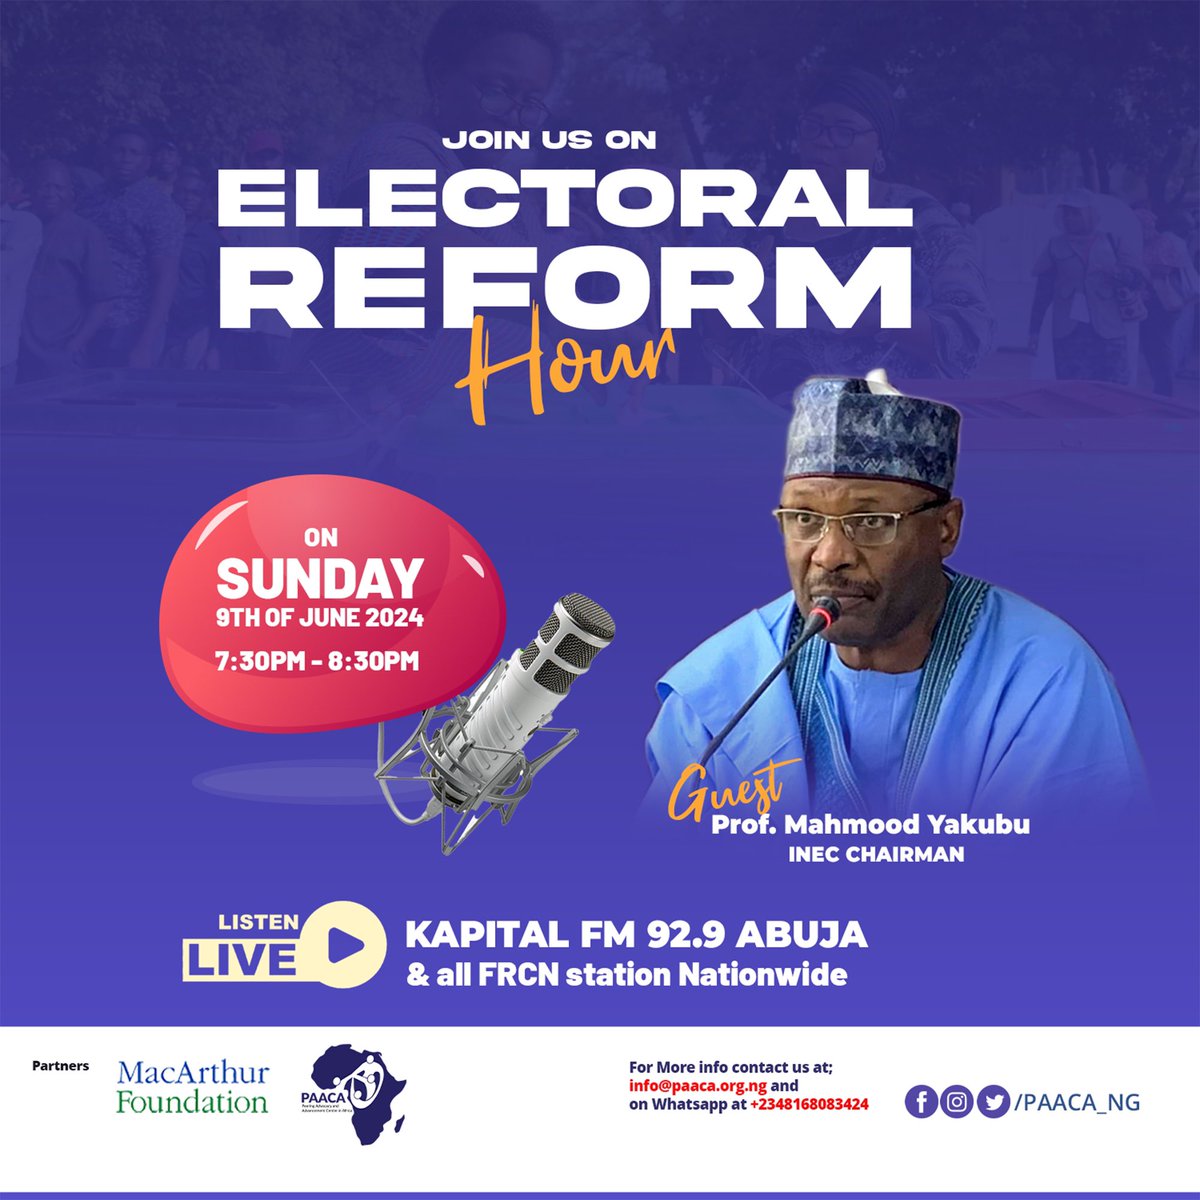 Don't miss out on #ElectoralReformHour with @inecnigeria Chairman Professor Mahmood Yakubu on Kapital FM 92.9 and FRCN Stations nationwide
Tune in on Sunday, 9th June from 7:30pm to 8:30pm

Send your questions via WhatsApp to 08168083424  @macfound @WRAPANG   @kapital929 #Nigeria